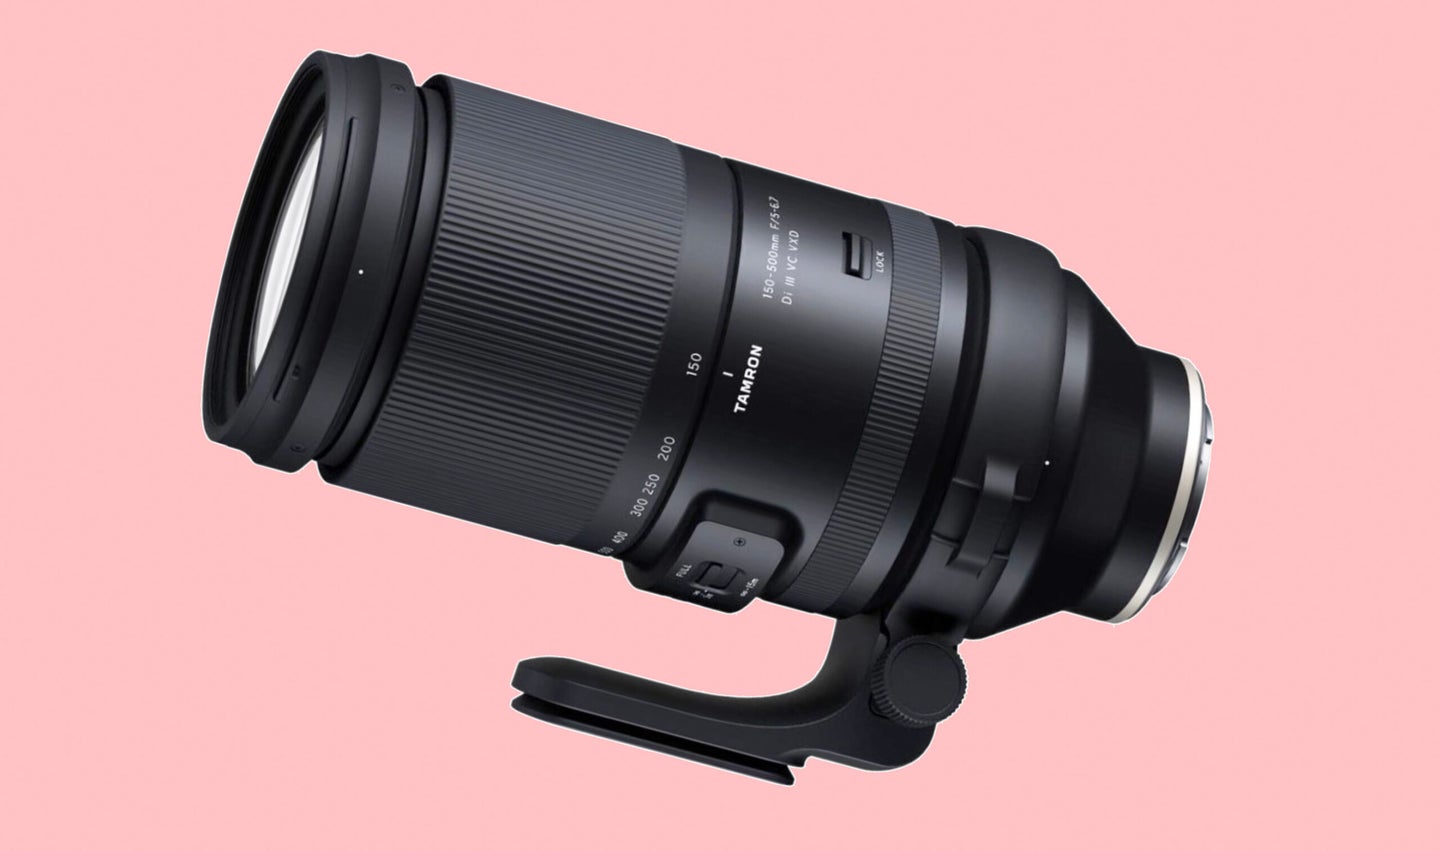 The Tamron 150-500mm f/5-6.7 is now available for X-mount.